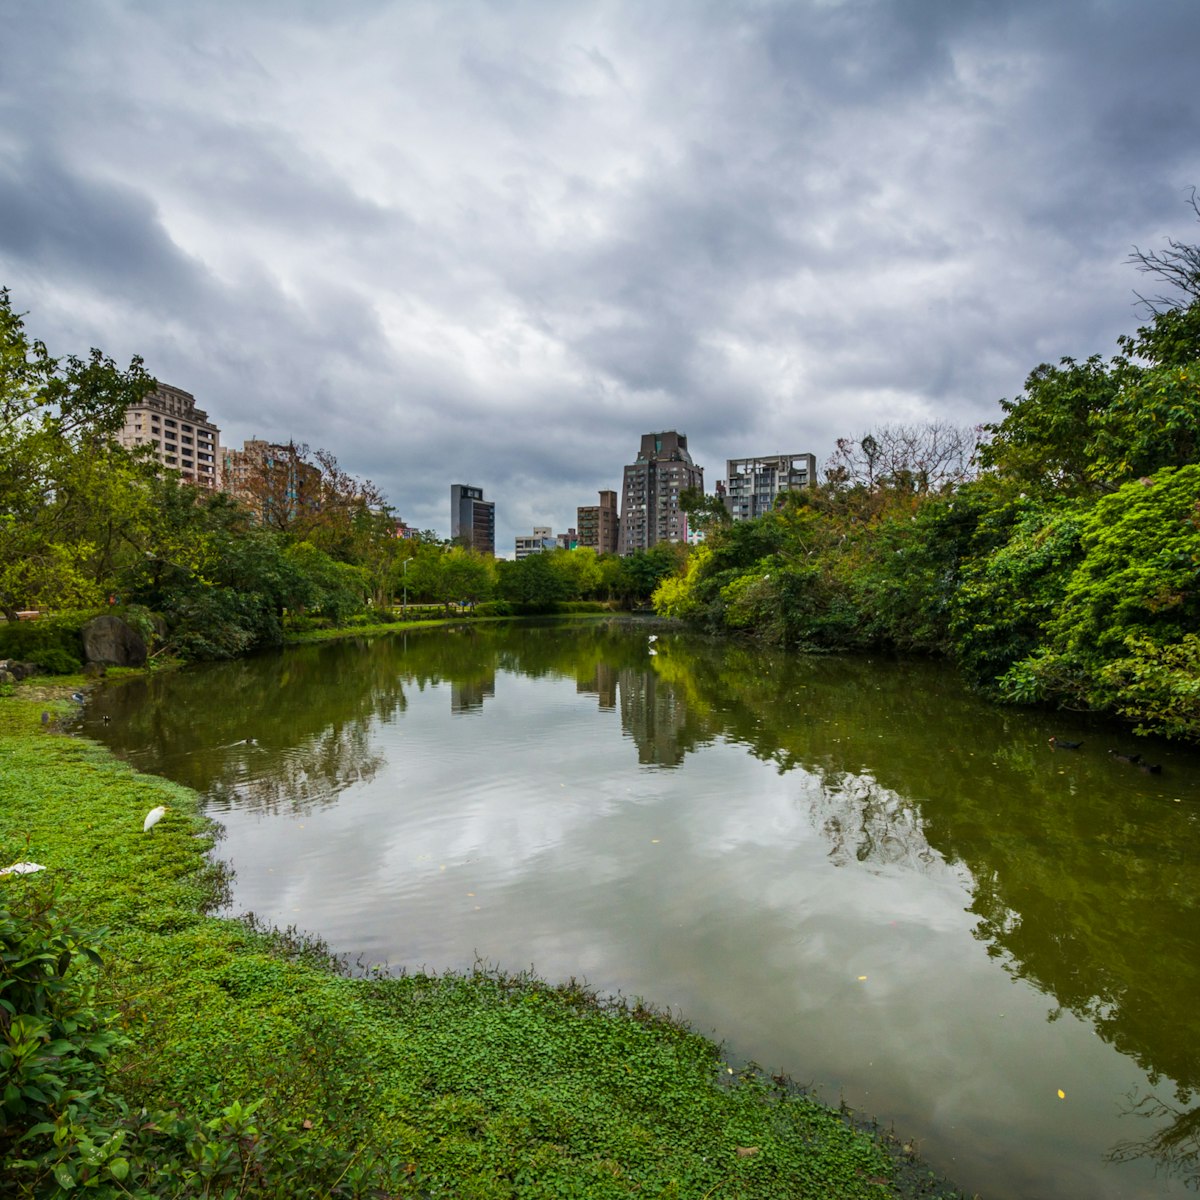 Lake at Daan Forest Park in Taipei, Taiwan.; Shutterstock ID 383533513; Your name (First / Last): Lauren Gillmore; GL account no.: 56530; Netsuite department name: Online-Design; Full Product or Project name including edition: 65050/ Online Design /LaurenGillmore/POI